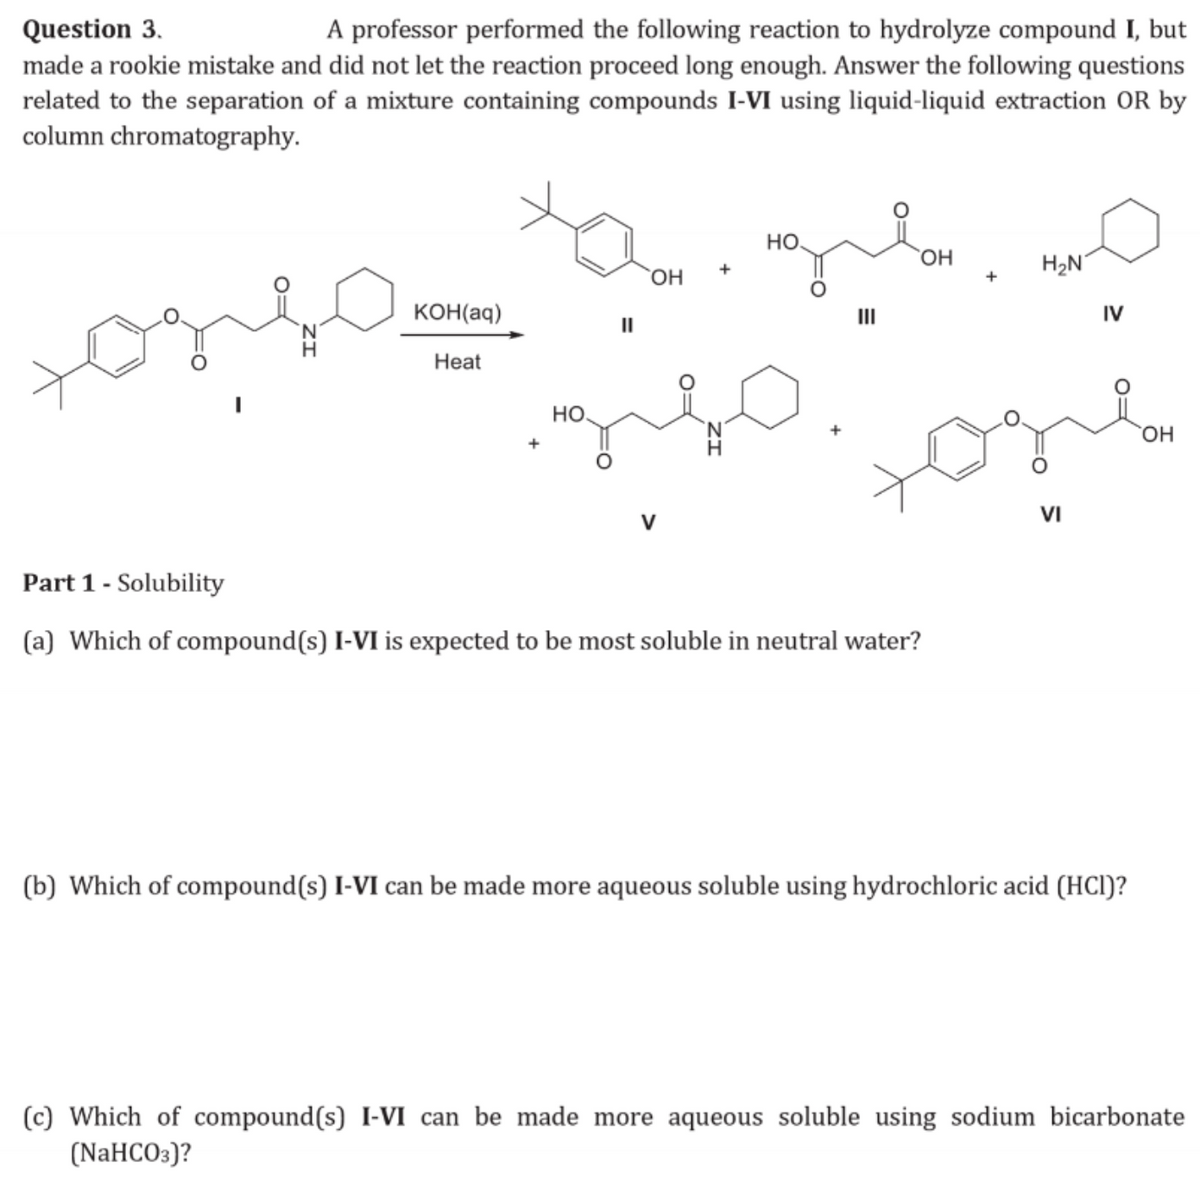 Question 3.
A professor performed the following reaction to hydrolyze compound I, but
made a rookie mistake and did not let the reaction proceed long enough. Answer the following questions
related to the separation of a mixture containing compounds I-VI using liquid-liquid extraction OR by
column chromatography.
одно
ха
двон
HO
OH
KOH(aq)
||
Heat
|
HO.
III
OH
H₂N
+
IV
+
Part 1 - Solubility
(a) Which of compound(s) I-VI is expected to be most soluble in neutral water?
O=
VI
(b) Which of compound(s) I-VI can be made more aqueous soluble using hydrochloric acid (HCI)?
(c) Which of compound(s) I-VI can be made more aqueous soluble using sodium bicarbonate
(NaHCO3)?
OH